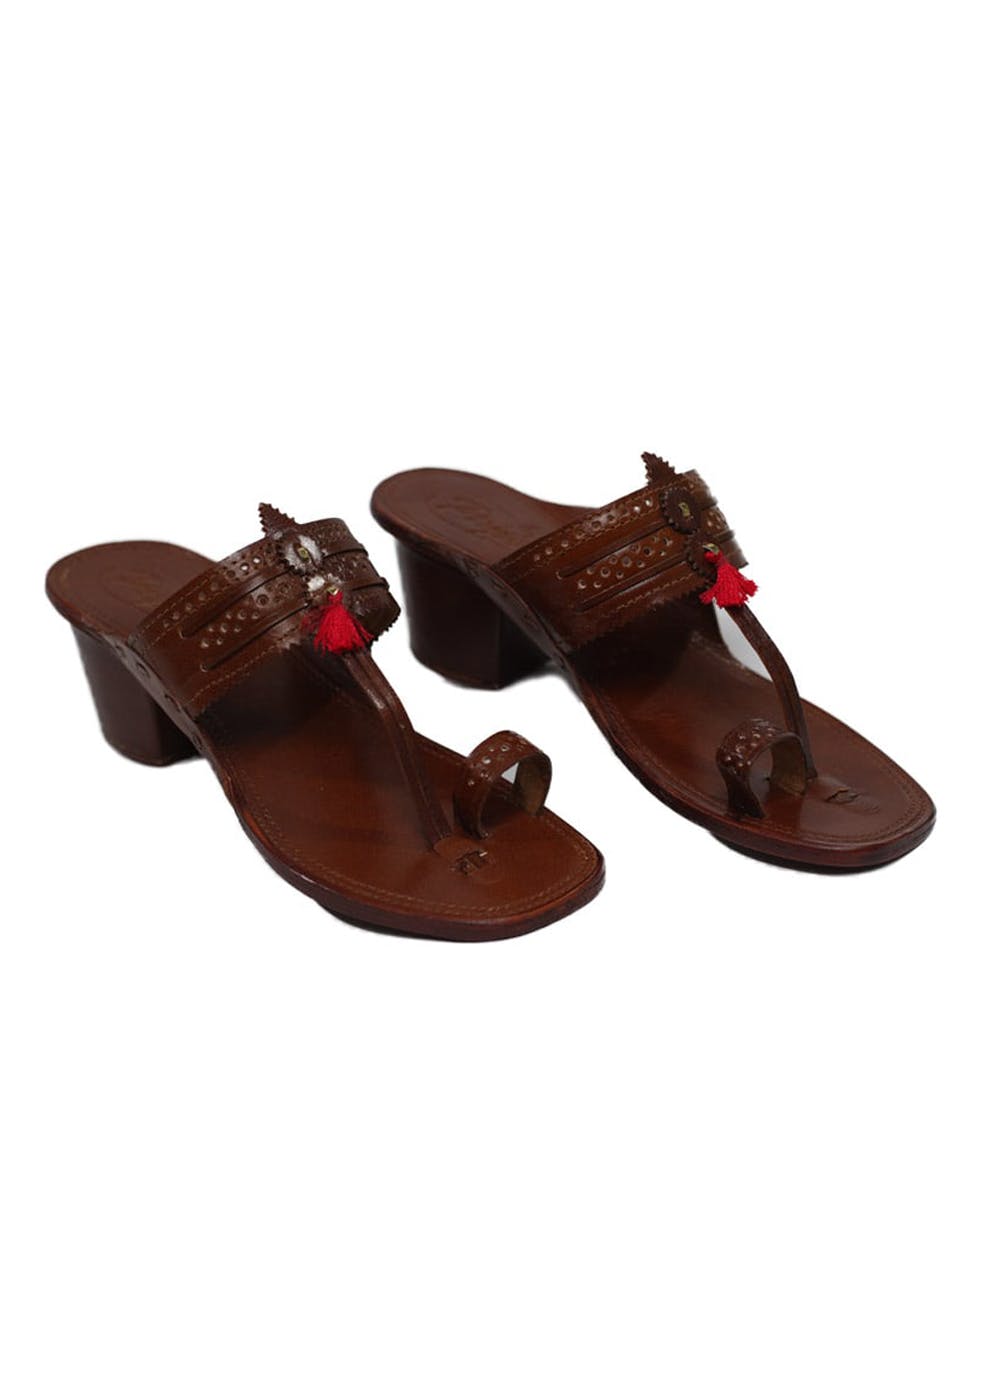 Best Brands To Check Out For Kolhapuri Chappals | So Delhi